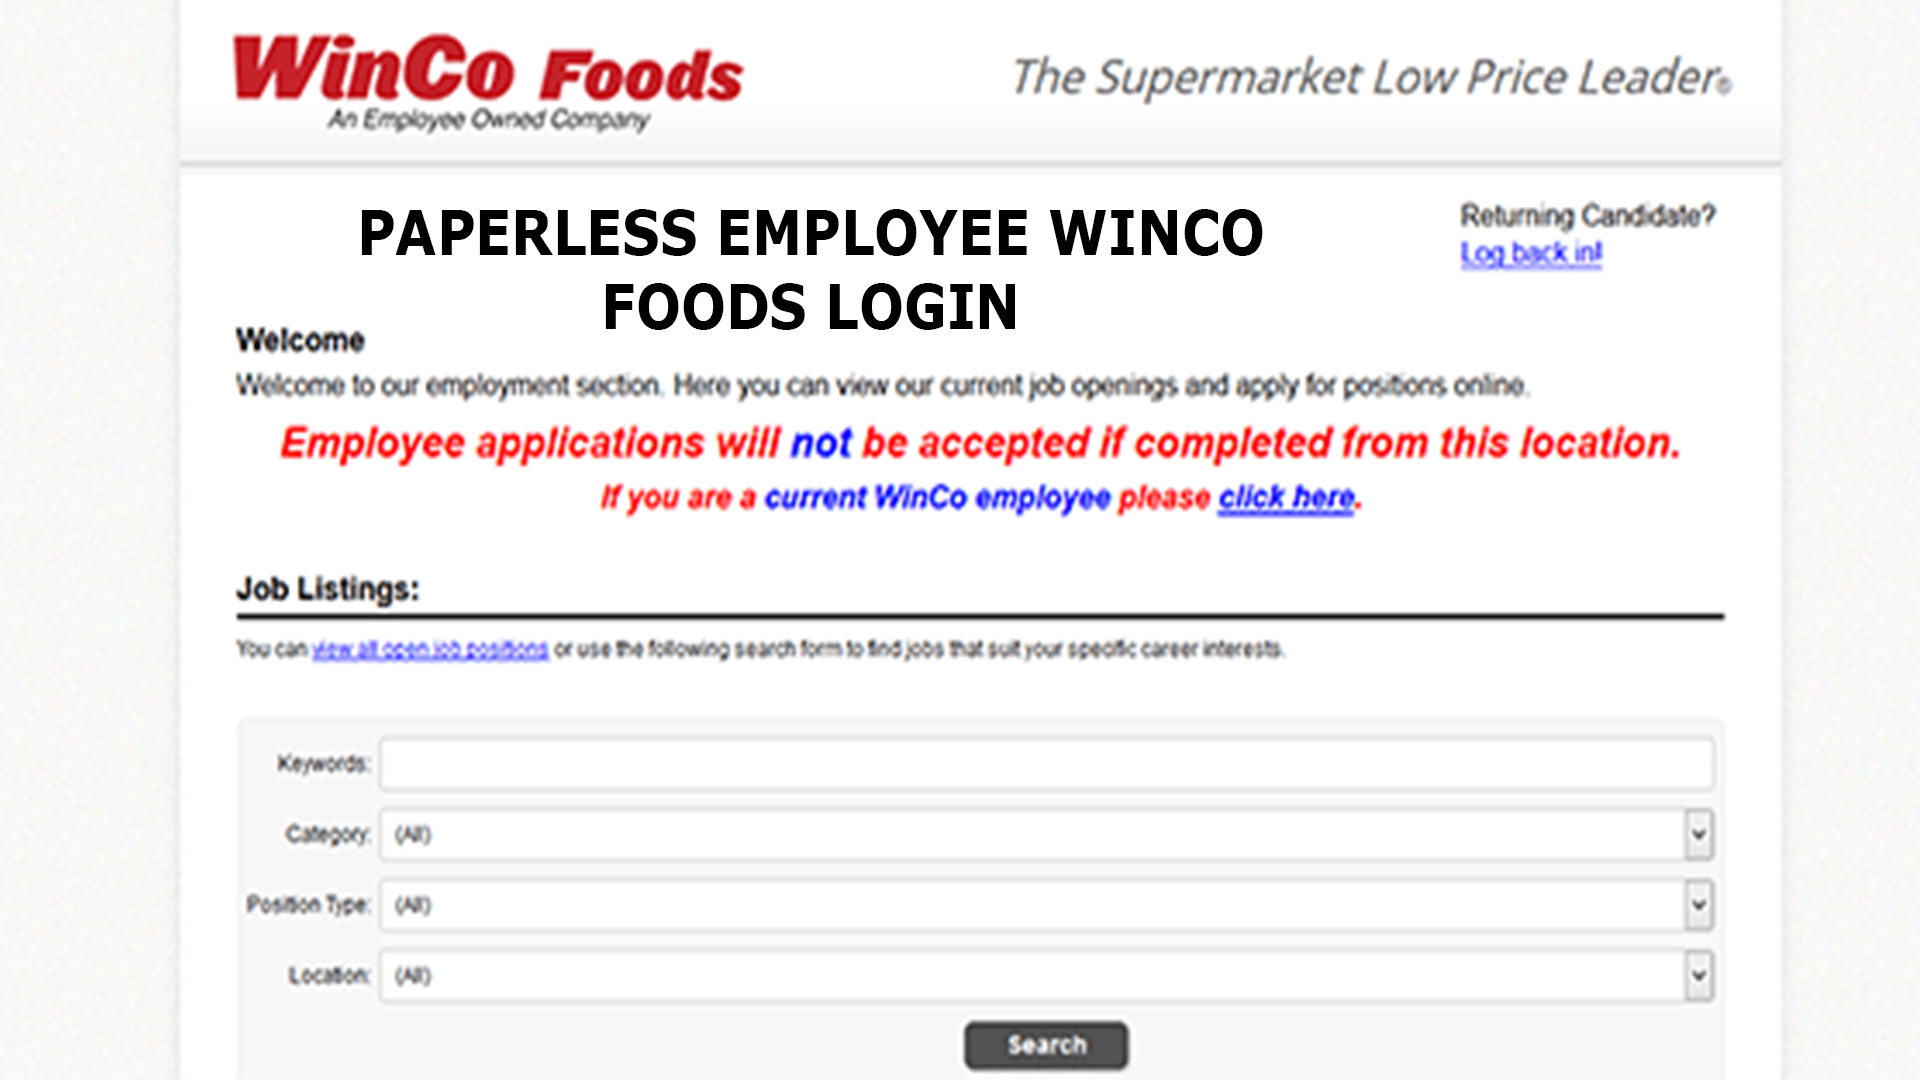 Paperless Employee Winco Foods Login At Www wincofoods Makeoverarena